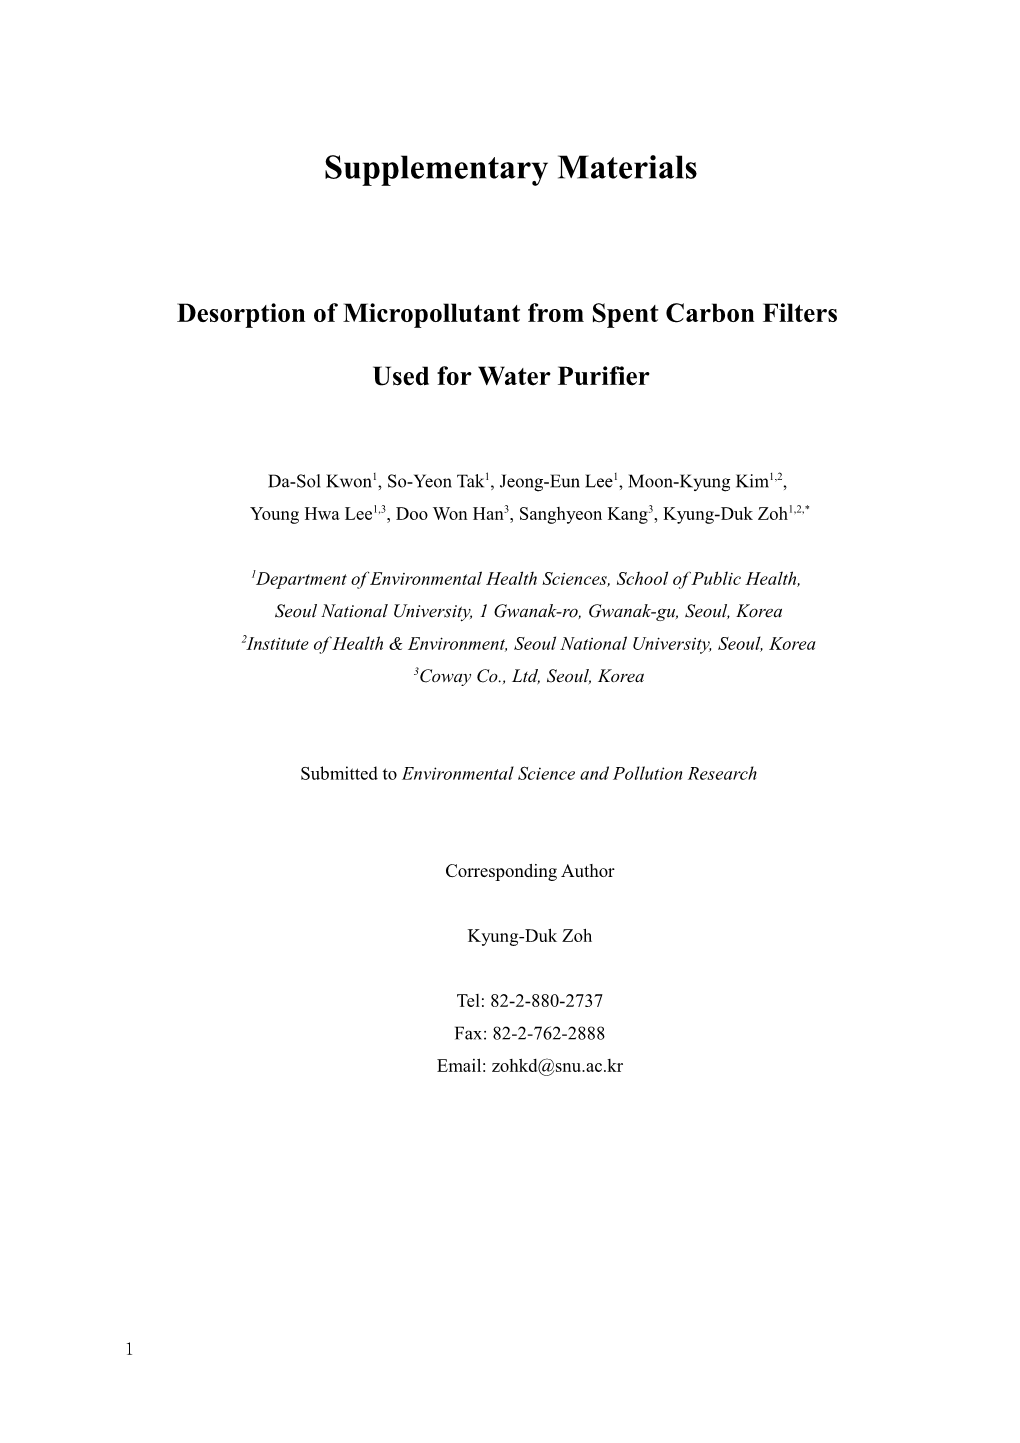 Desorption of Micropollutant from Spent Carbon Filters